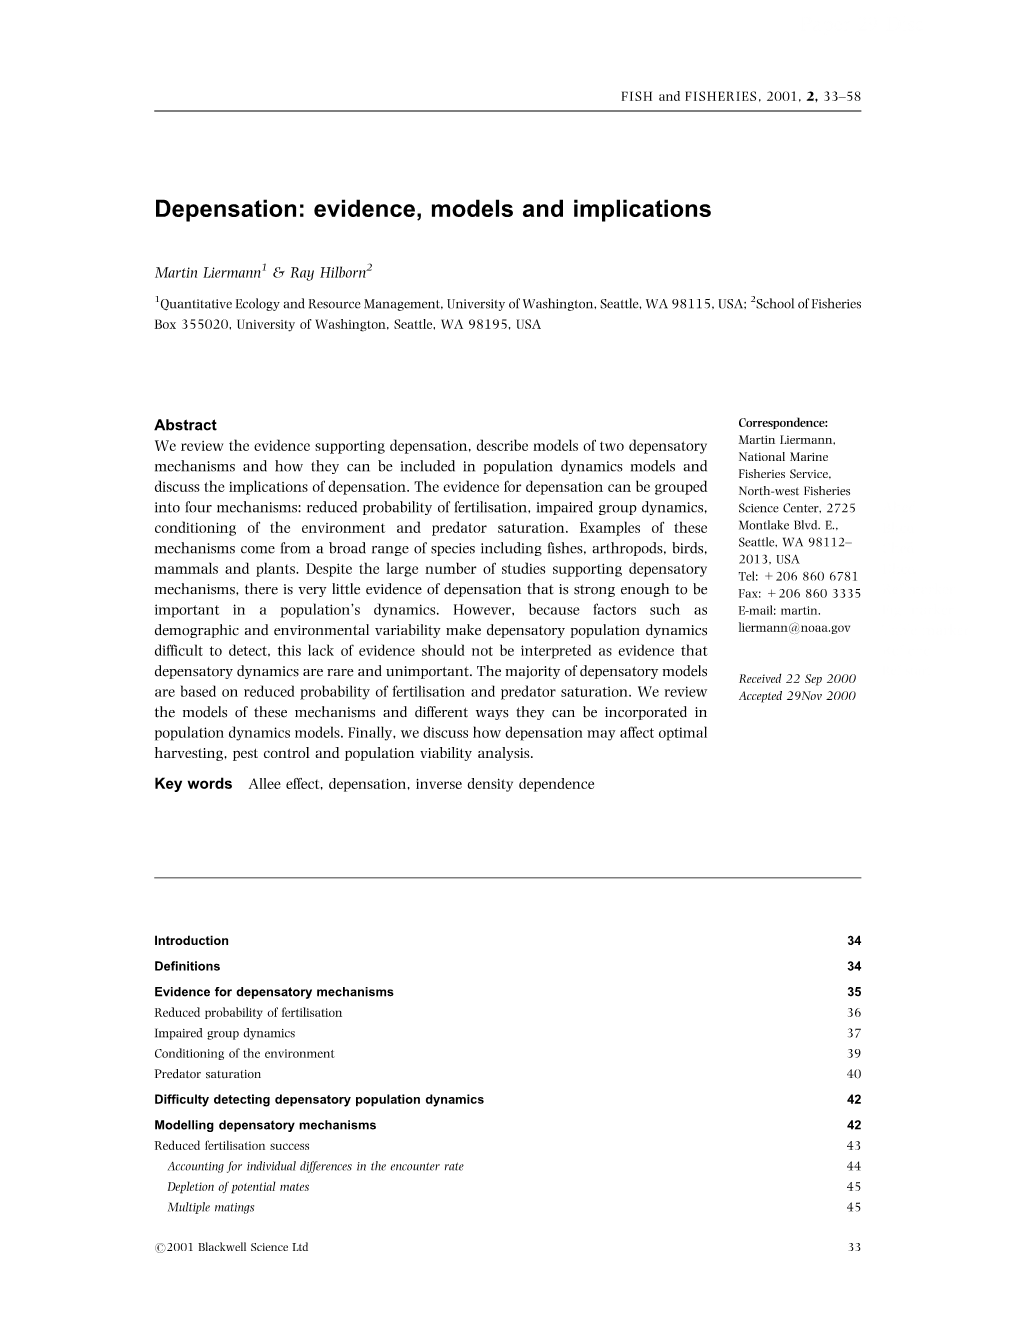 Depensation: Evidence, Models and Implications